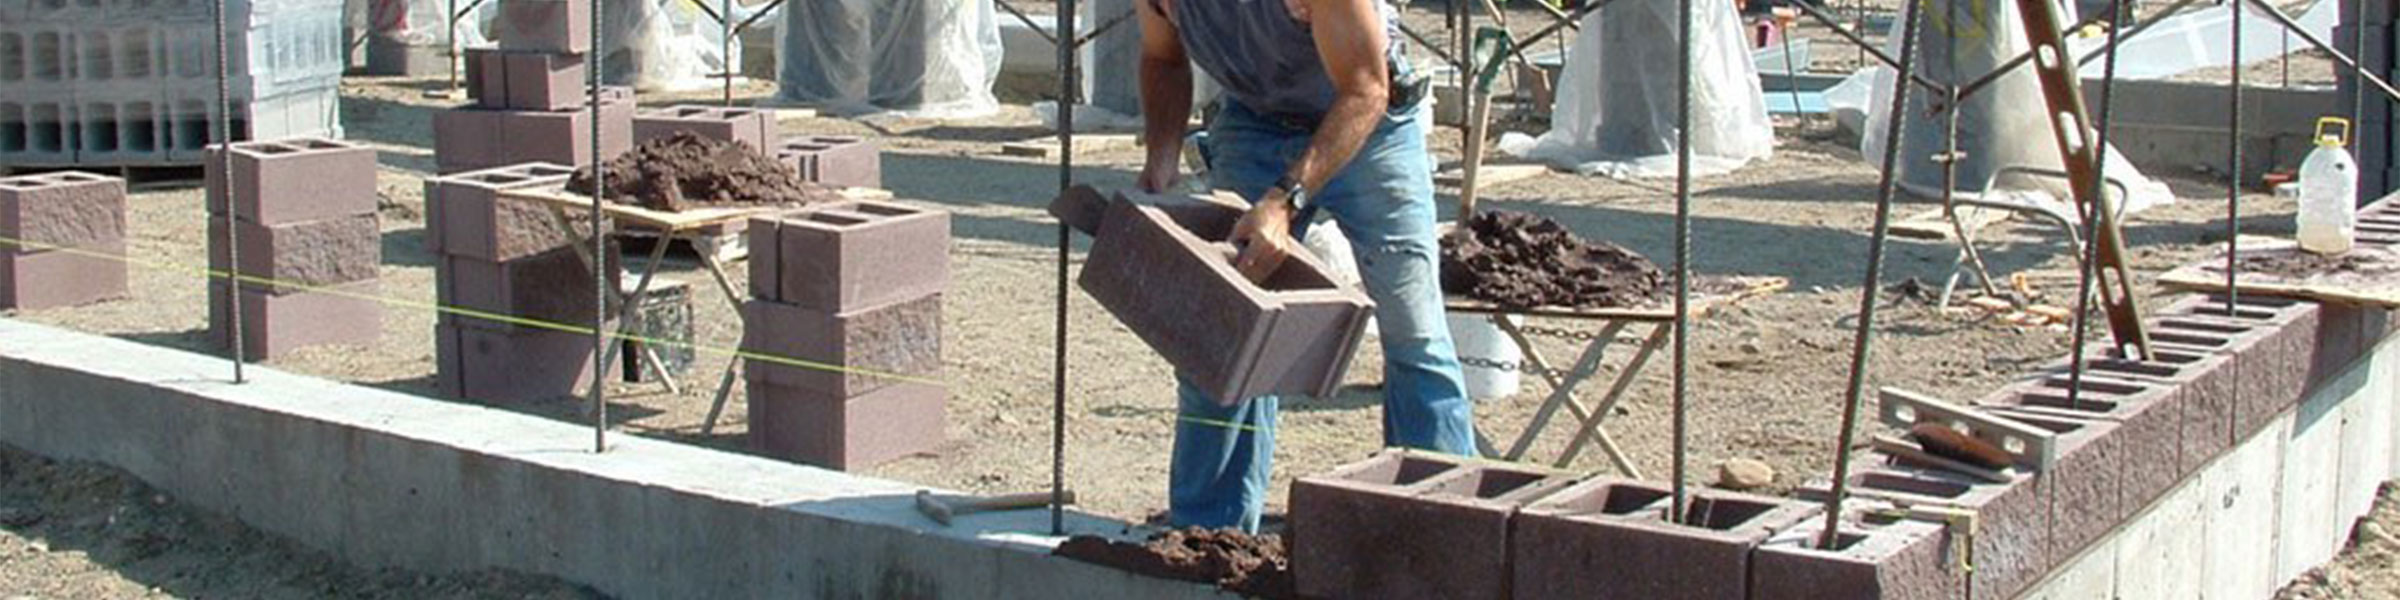 guy laying concrete blocks in building foundation